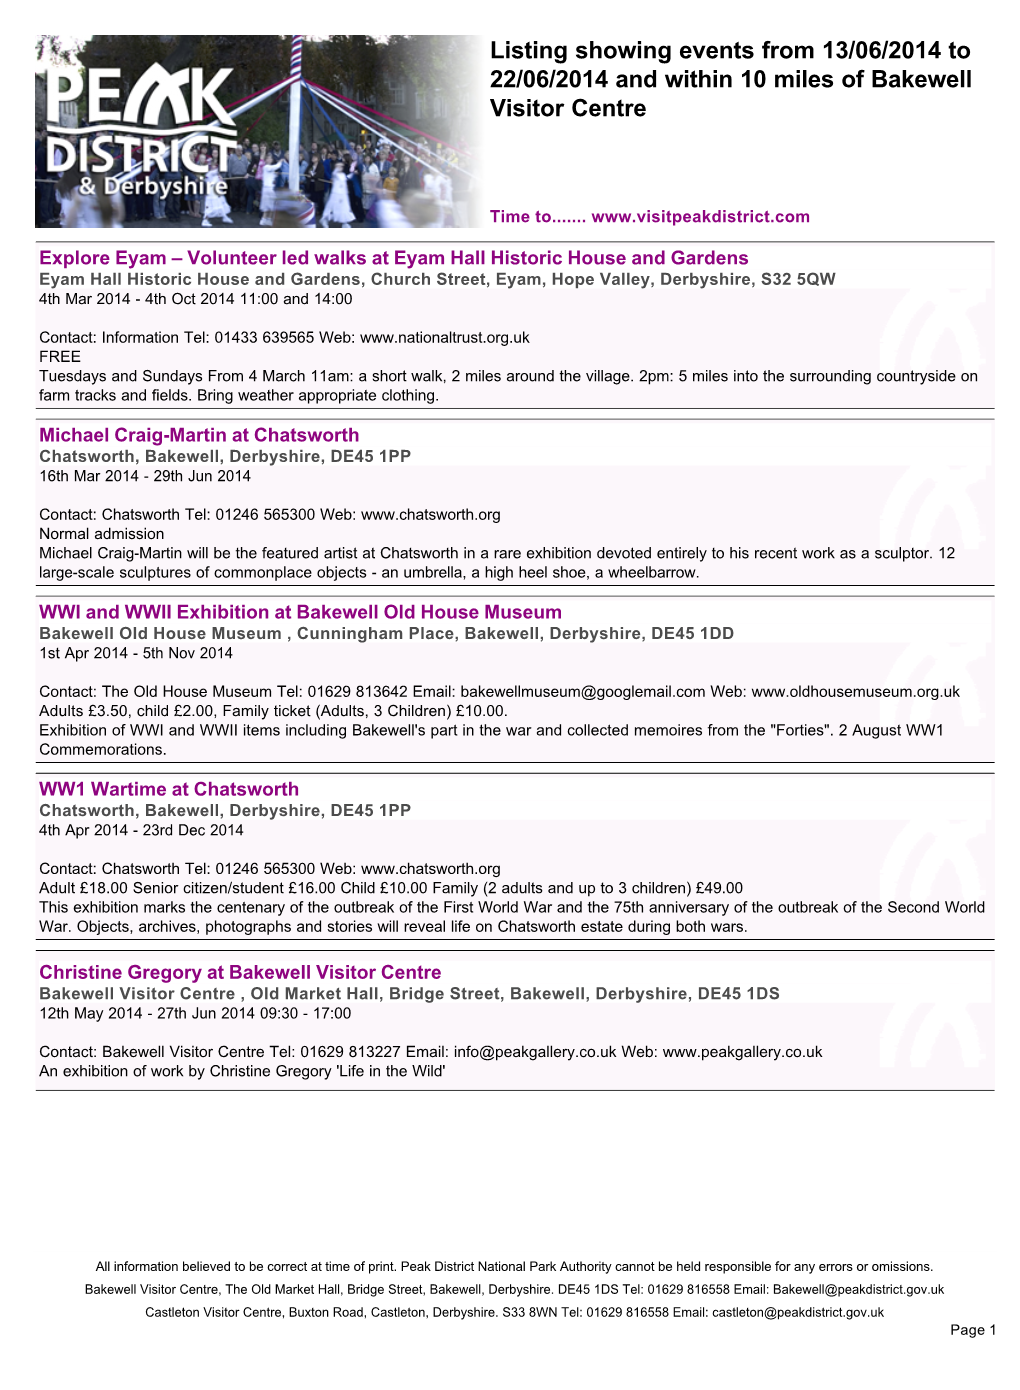 Listing Showing Events from 13/06/2014 to 22/06/2014 and Within 10 Miles of Bakewell Visitor Centre